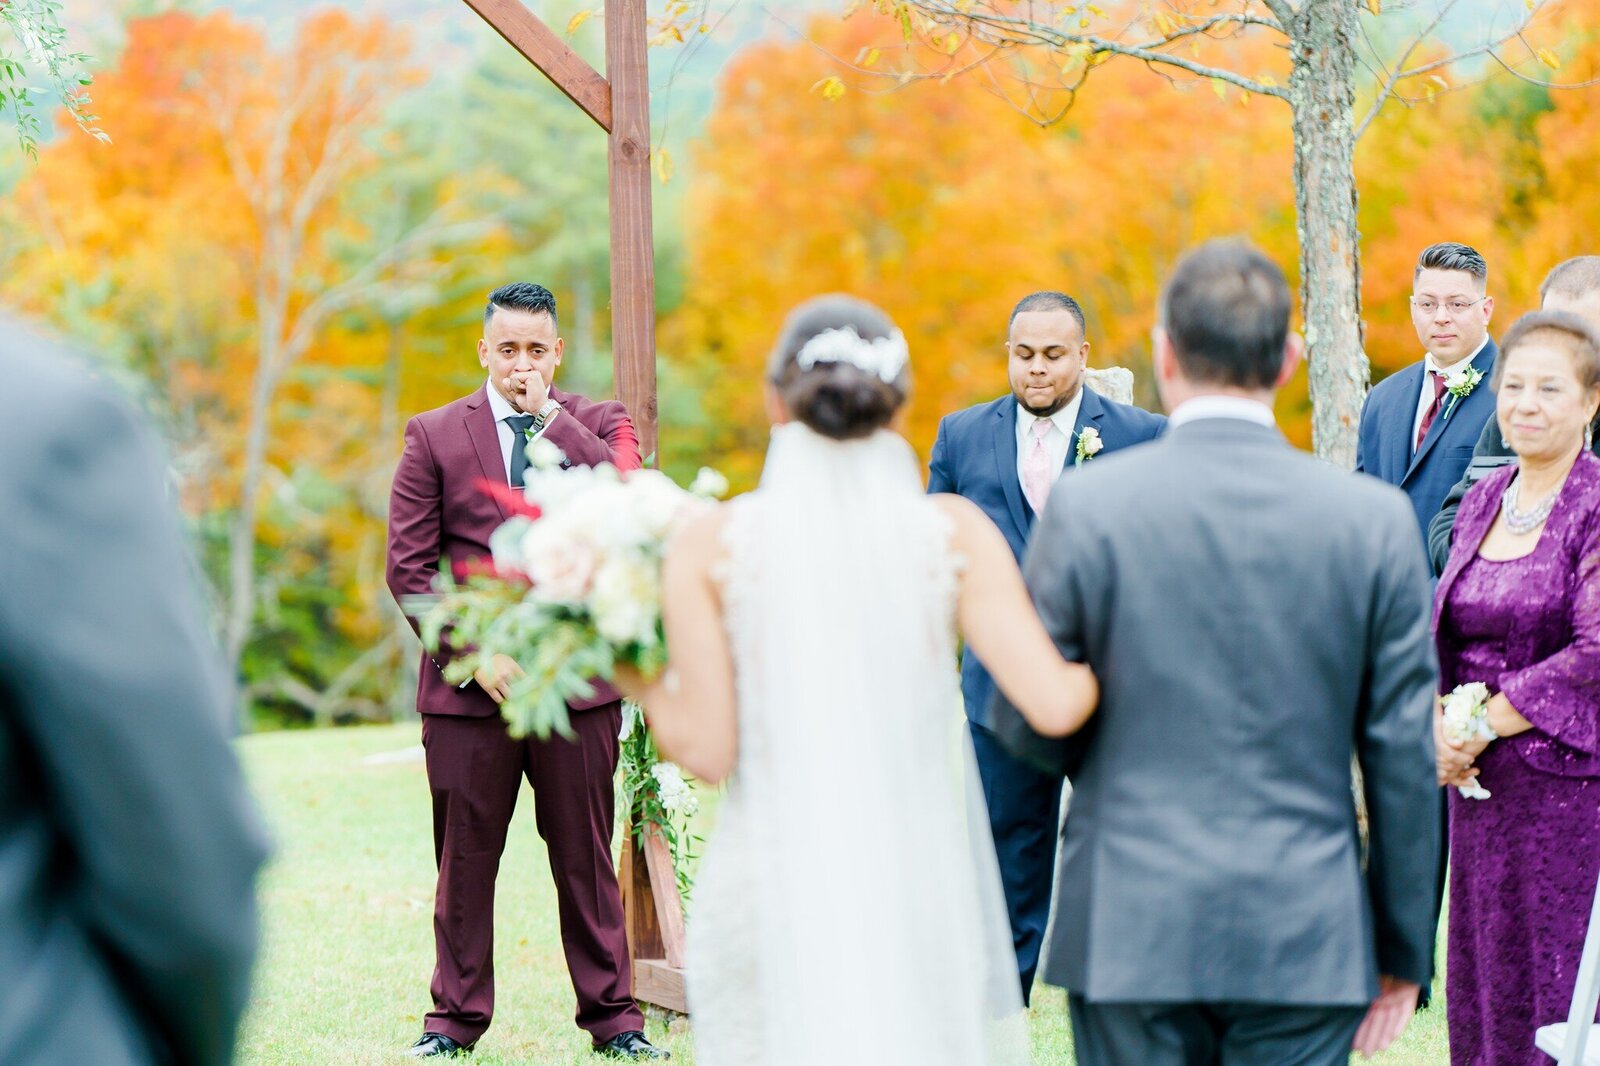 New Hampshire bride walking down the aisle to groom